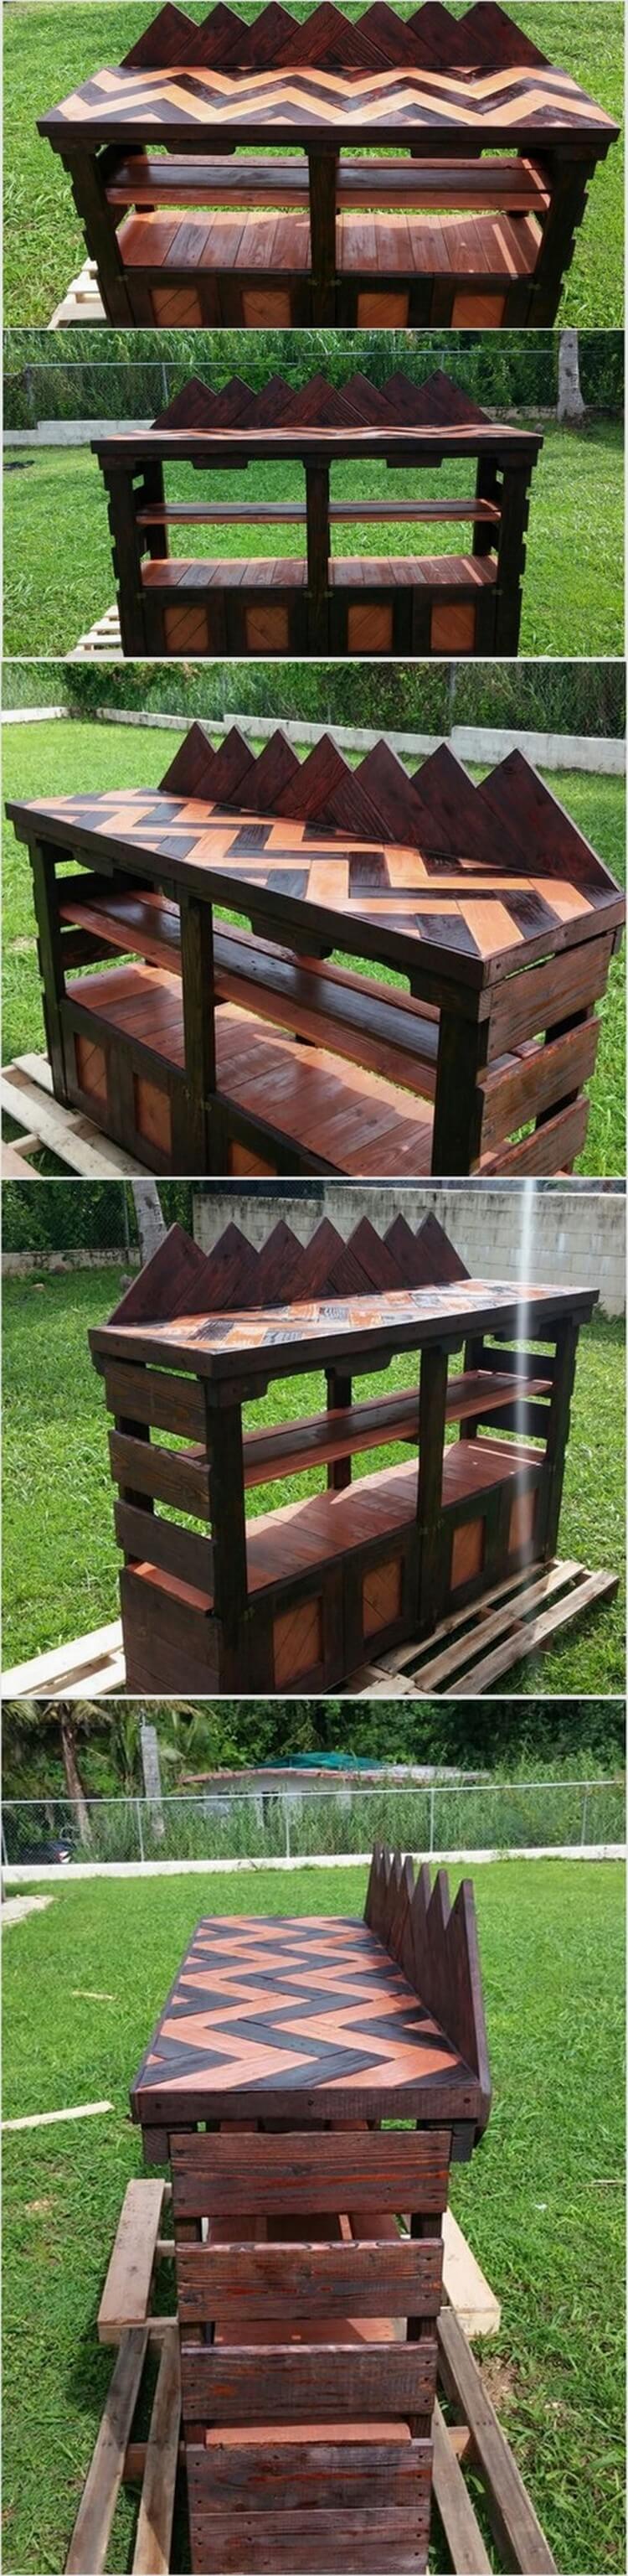 Prepare Cute Outdoor Bar with Used Wood Pallets Pallet 